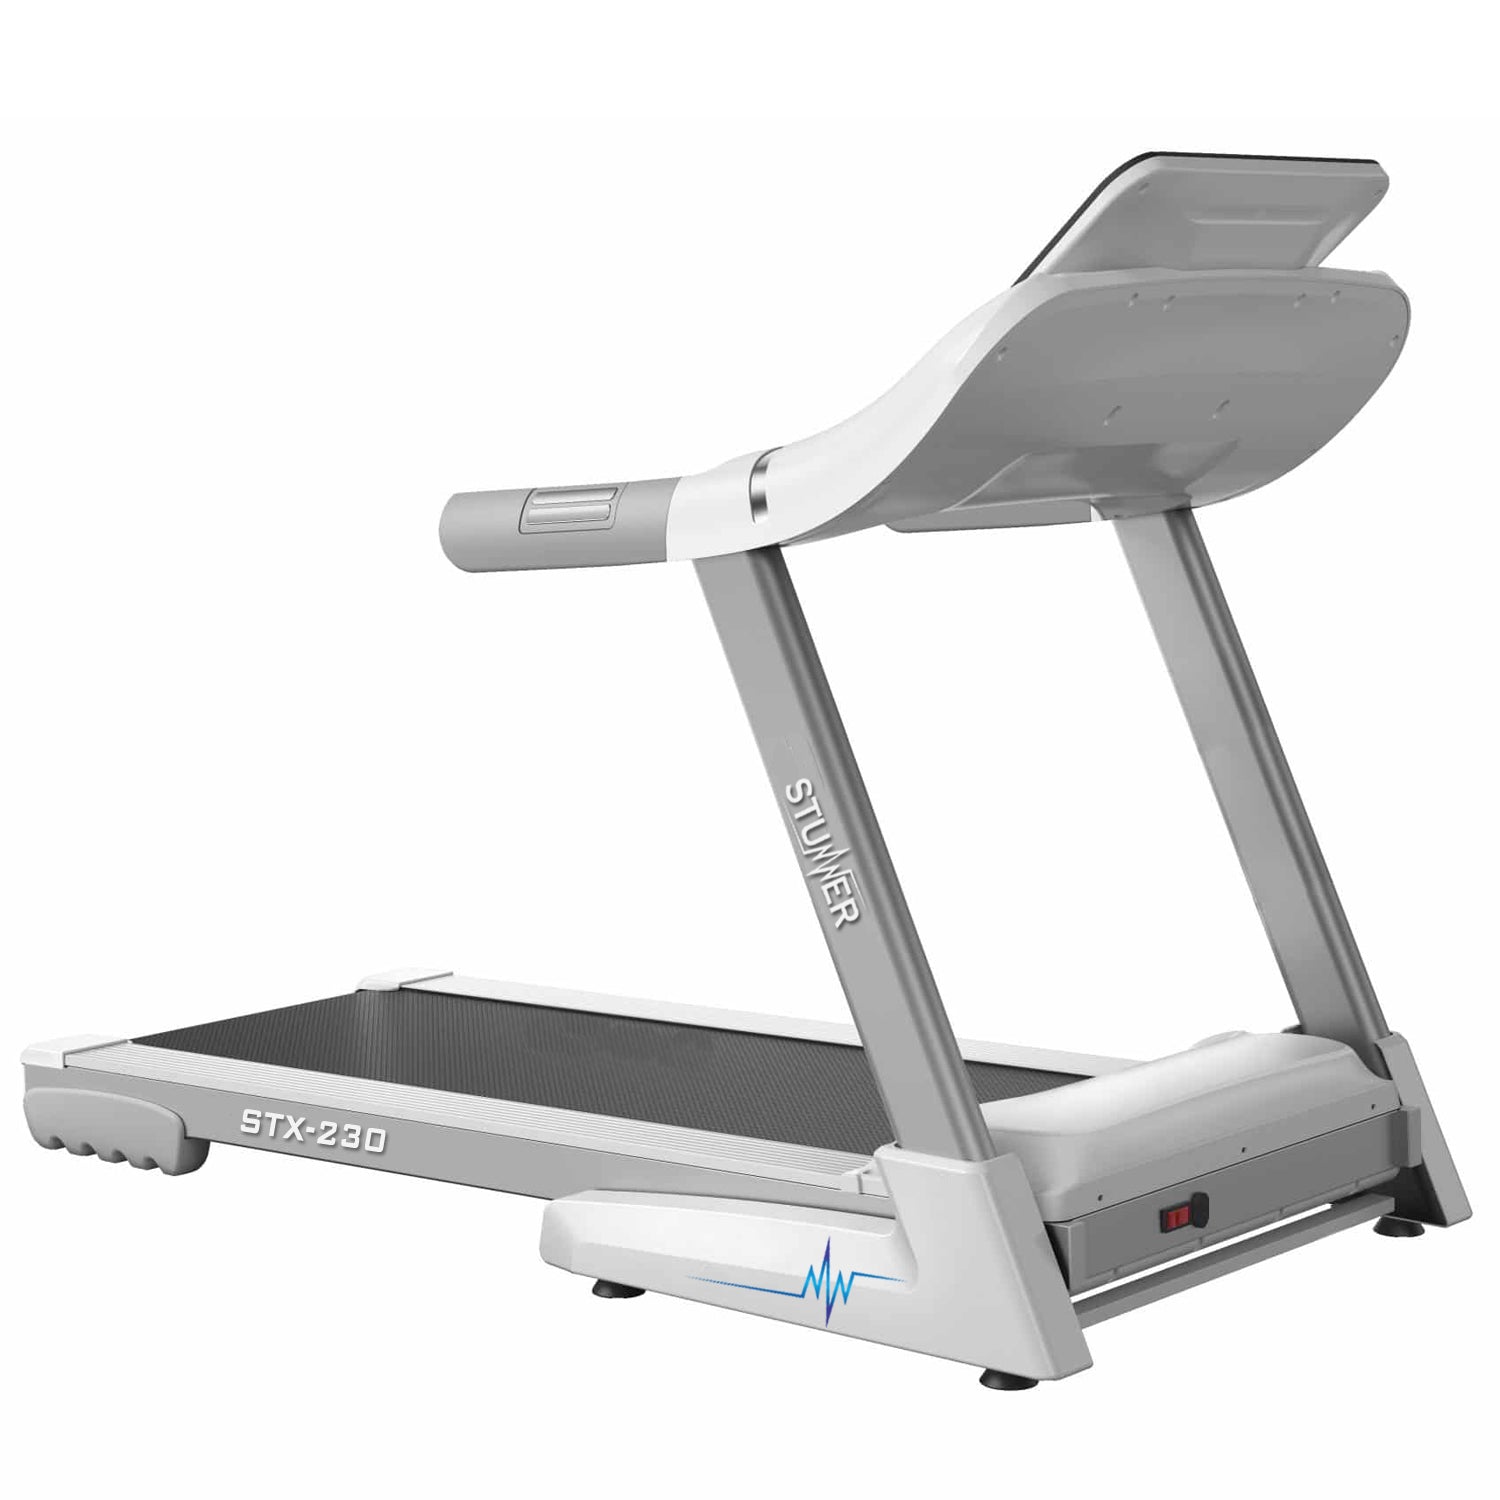 Stunner Fitness STX-230 2.0HP (4.0HP Peak) Motorised Treadmill with SSAT Technology | Bluetooth Speakers for Home Use